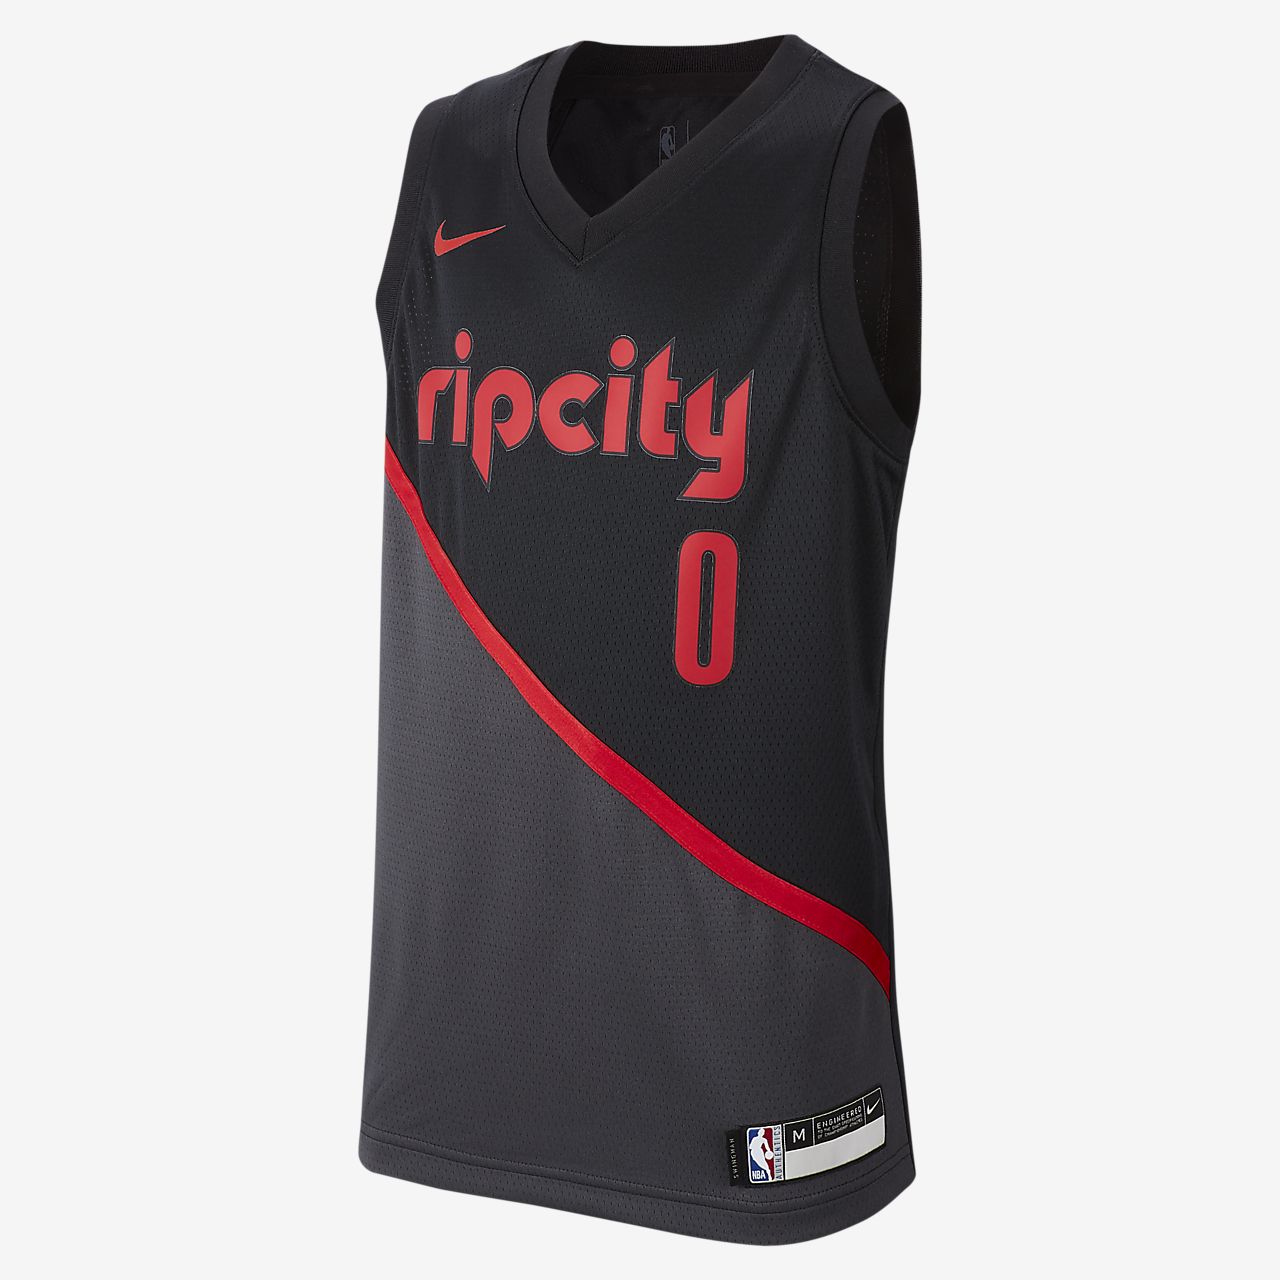 rip city jersey red